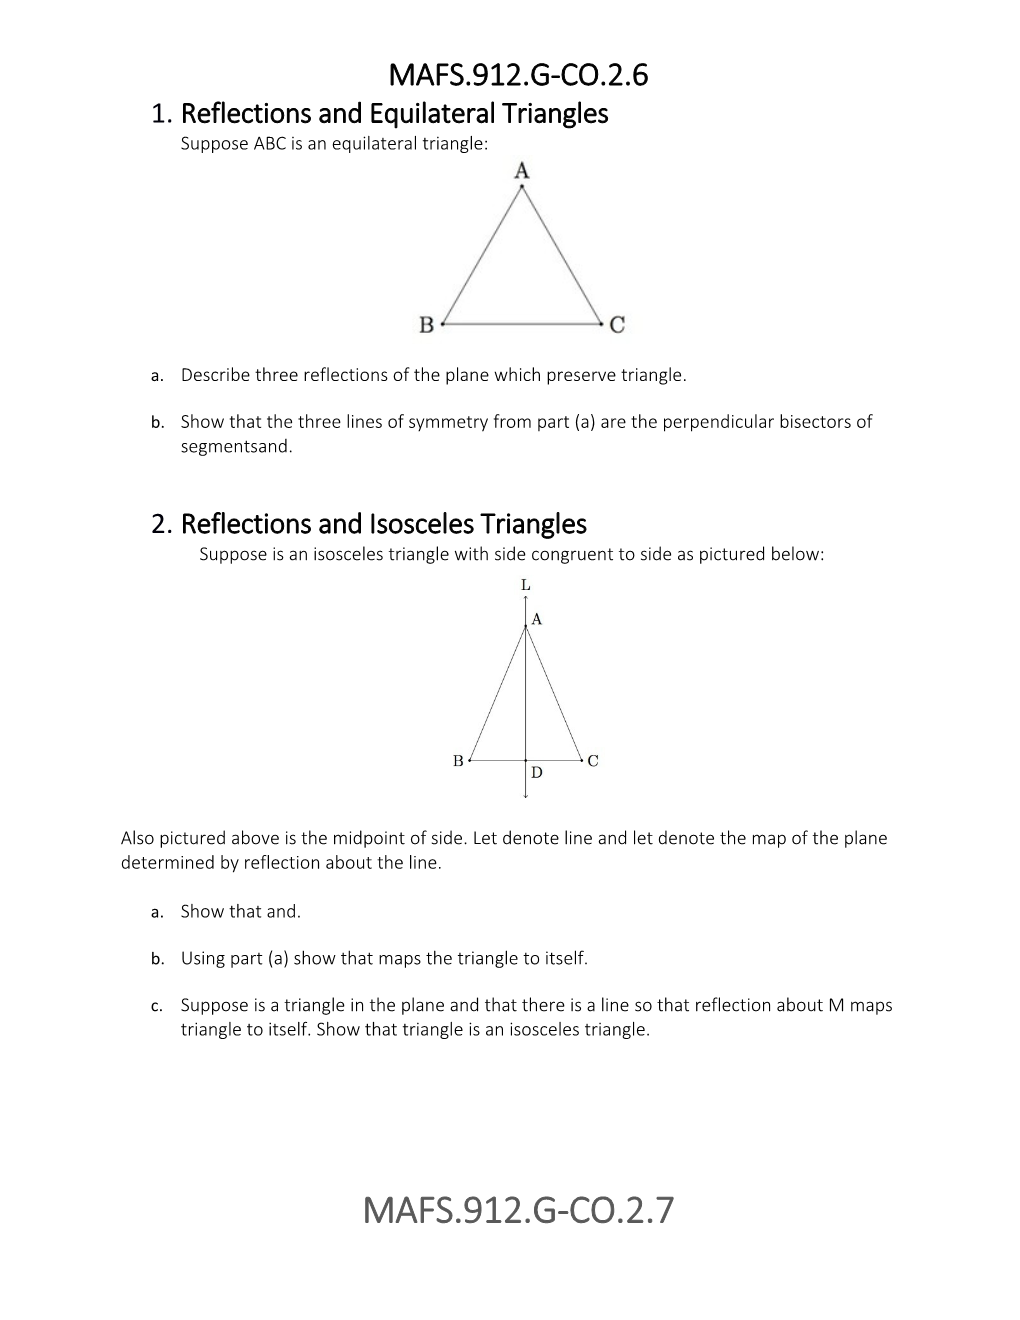 Reflections and Equilateral Triangles Supposeabcis an Equilateral Triangle